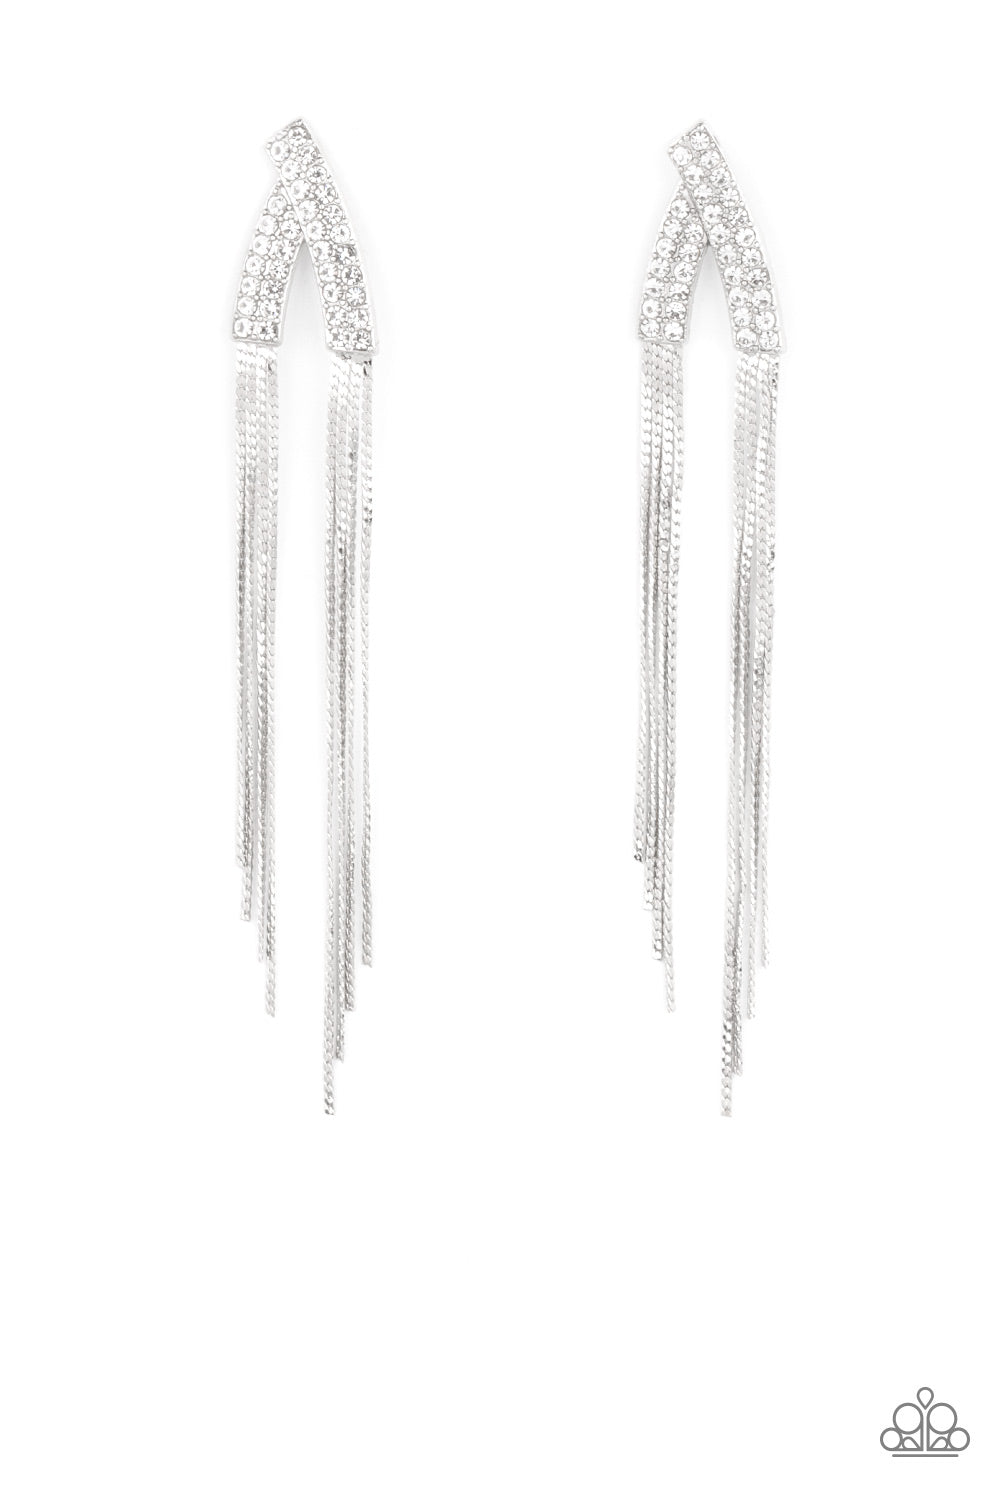 It Takes Two To TASSEL - White post earring 2195